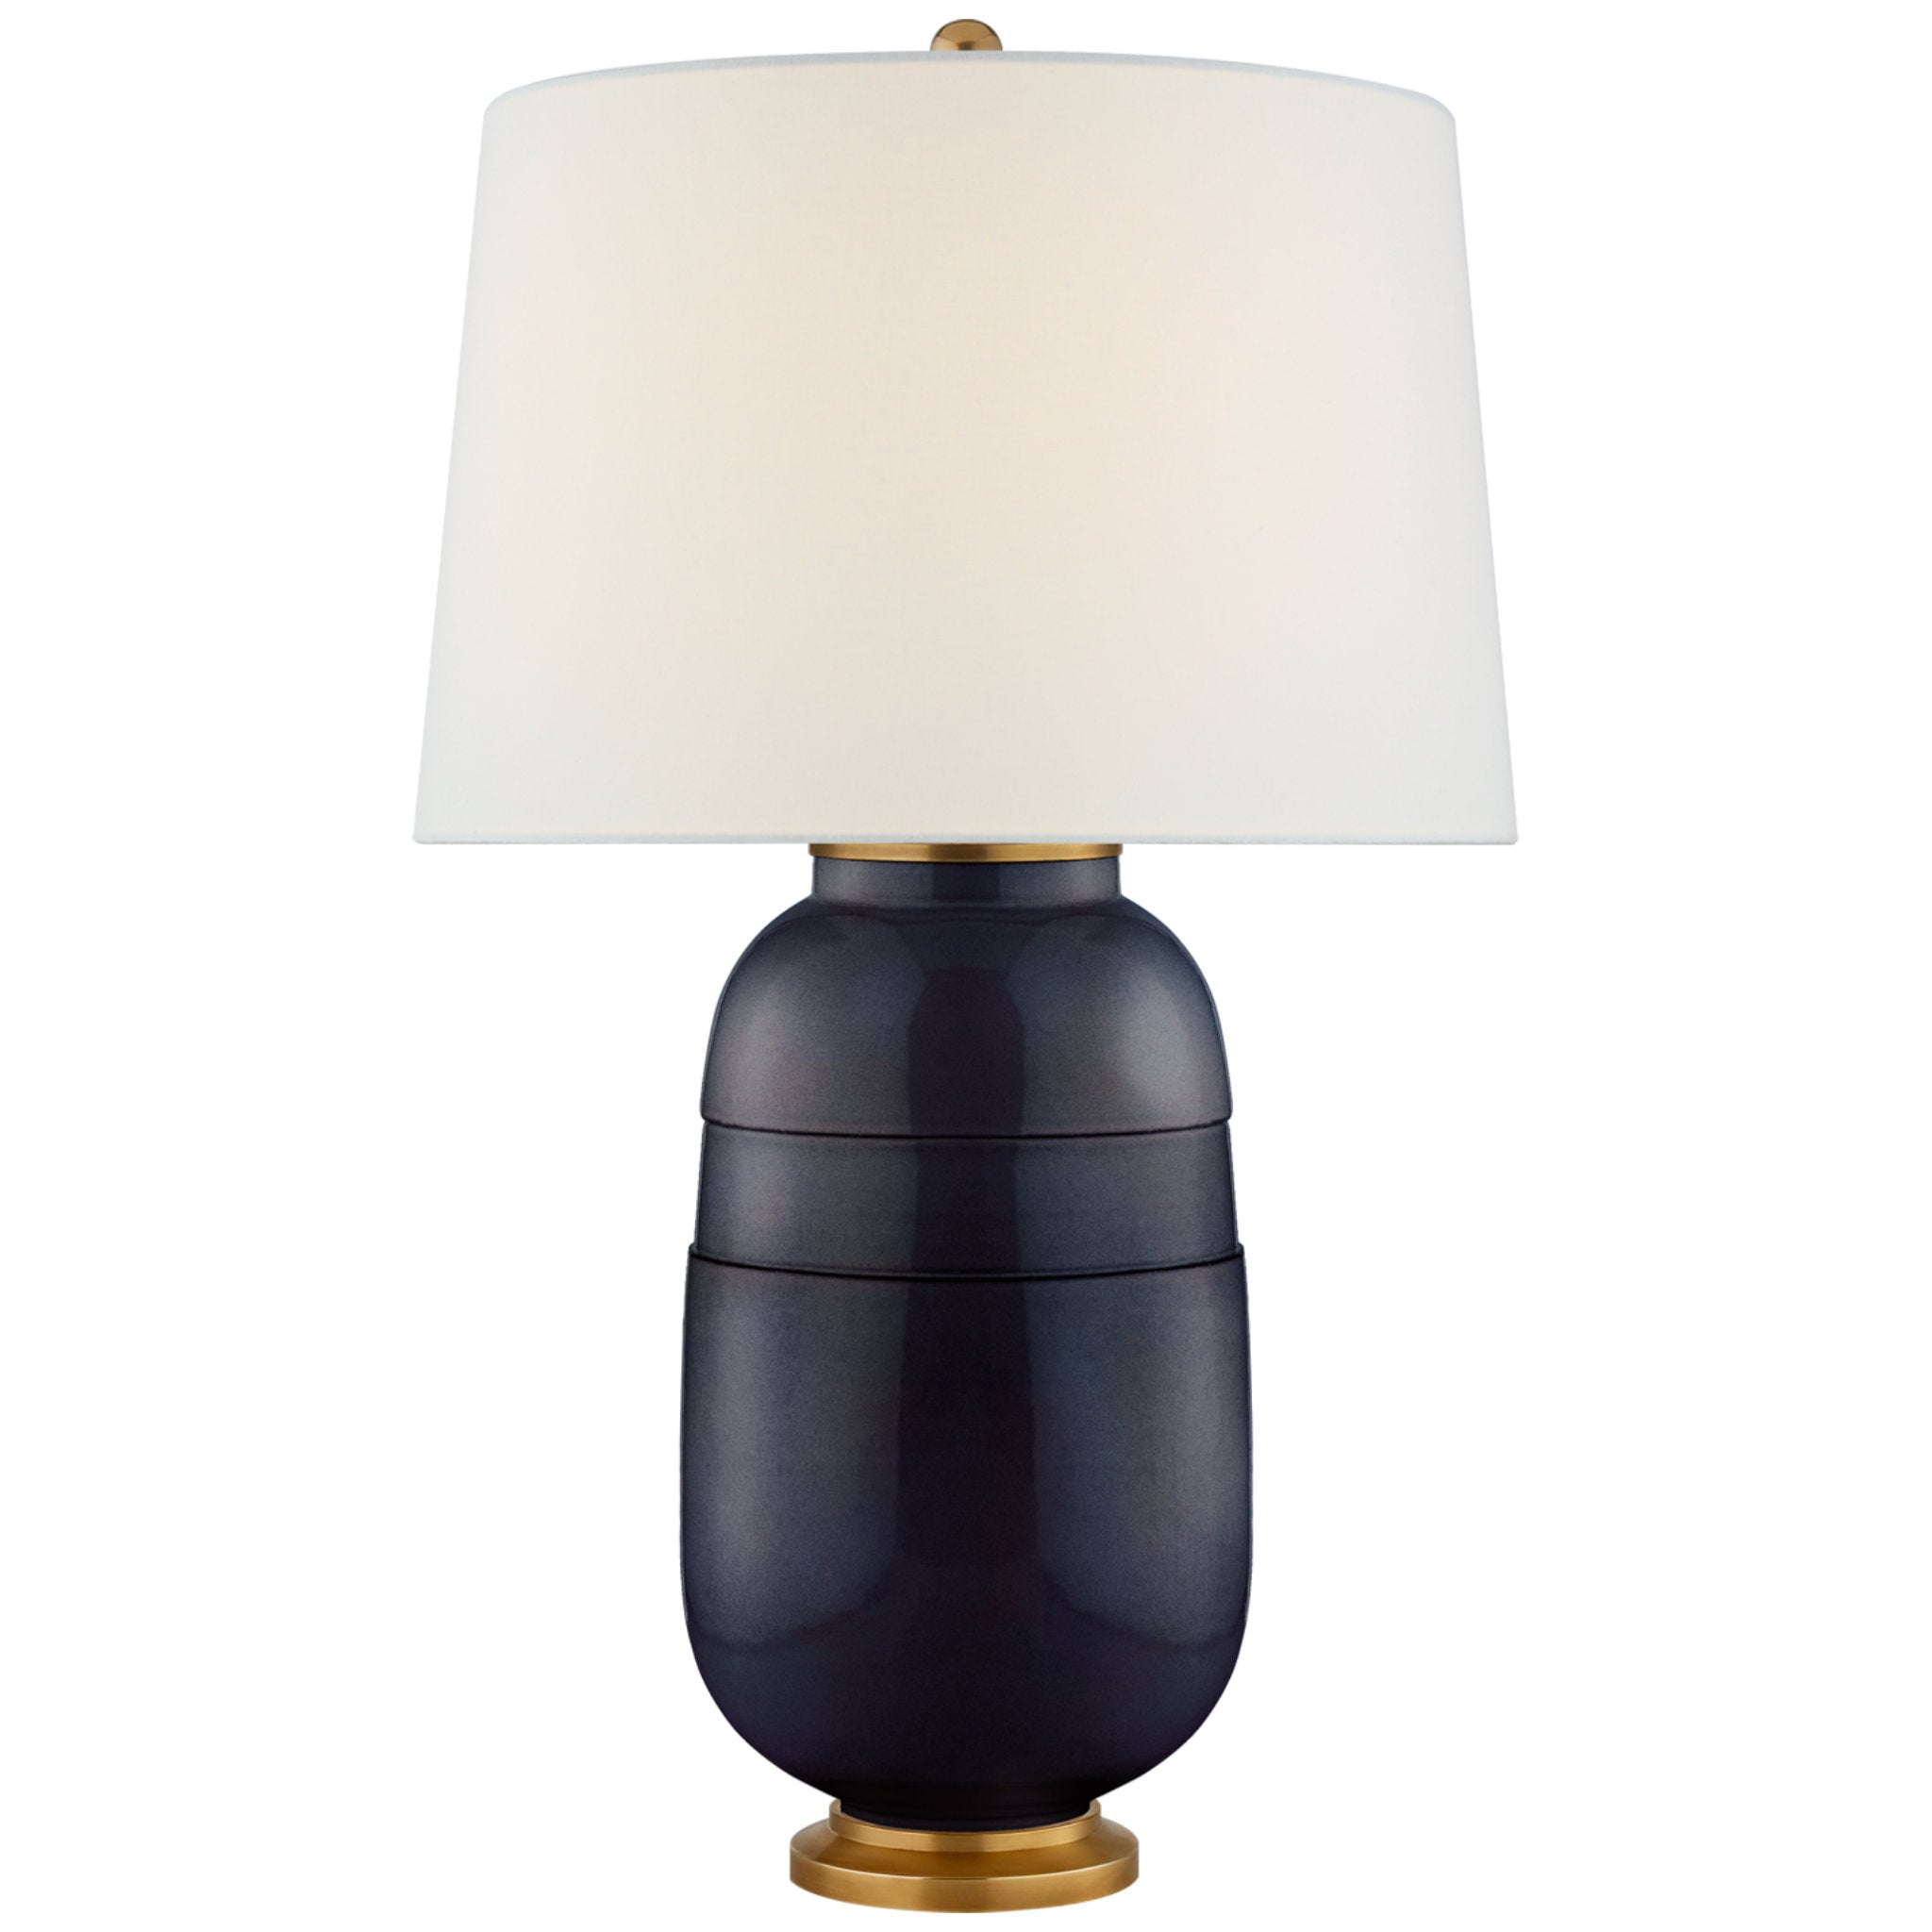 Christopher Spitzmiller Newcomb Medium Table Lamp in Mixed Blue Brown with Linen Shade